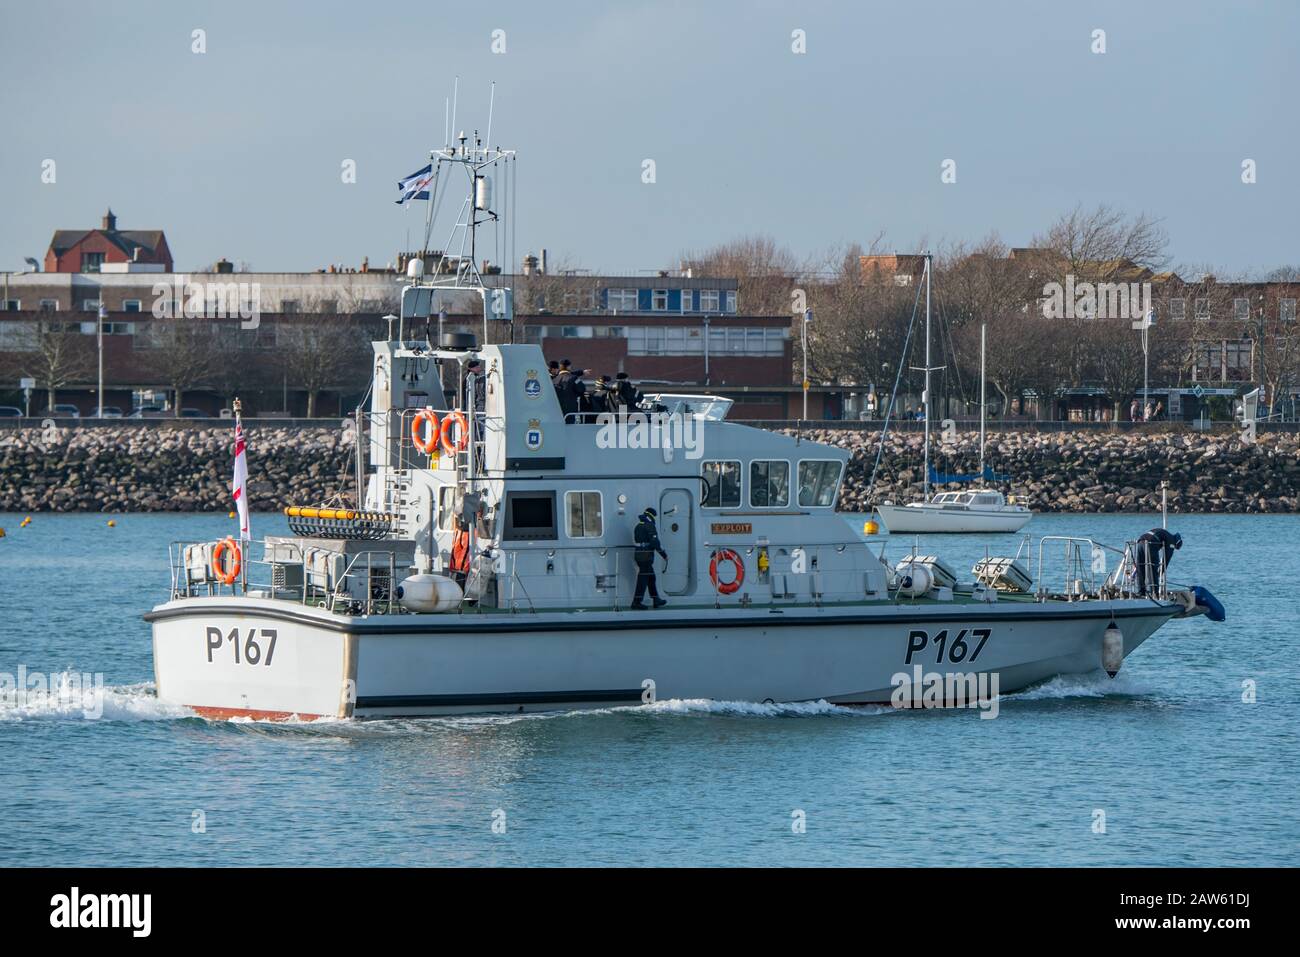 The Royal Navy Archer Class patrol boat HMS Exploit (P167) in Portsmouth Harbour, UK on the 5th February 2020. Stock Photo